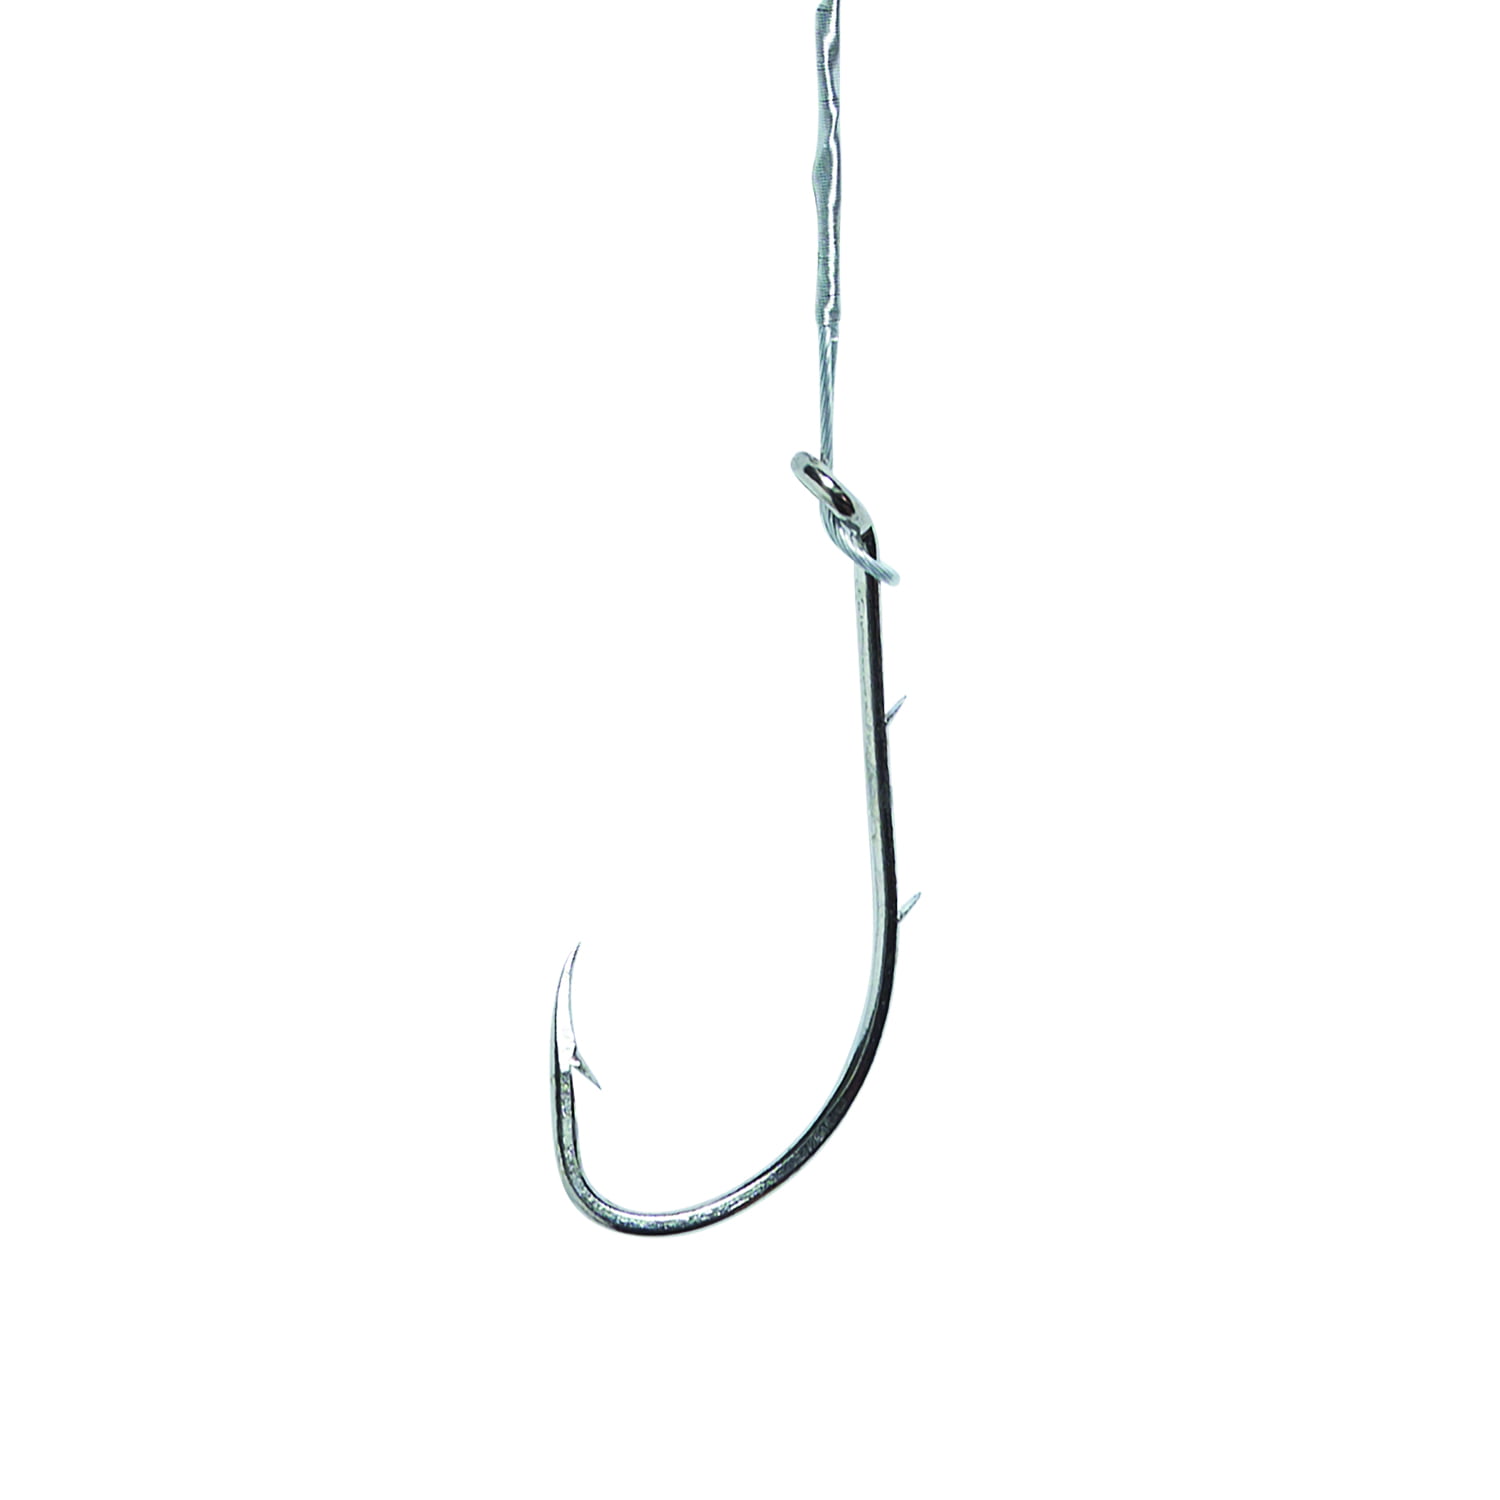 Eagle Claw 2x Long Shank Nylawire Snell Hooks for sale online